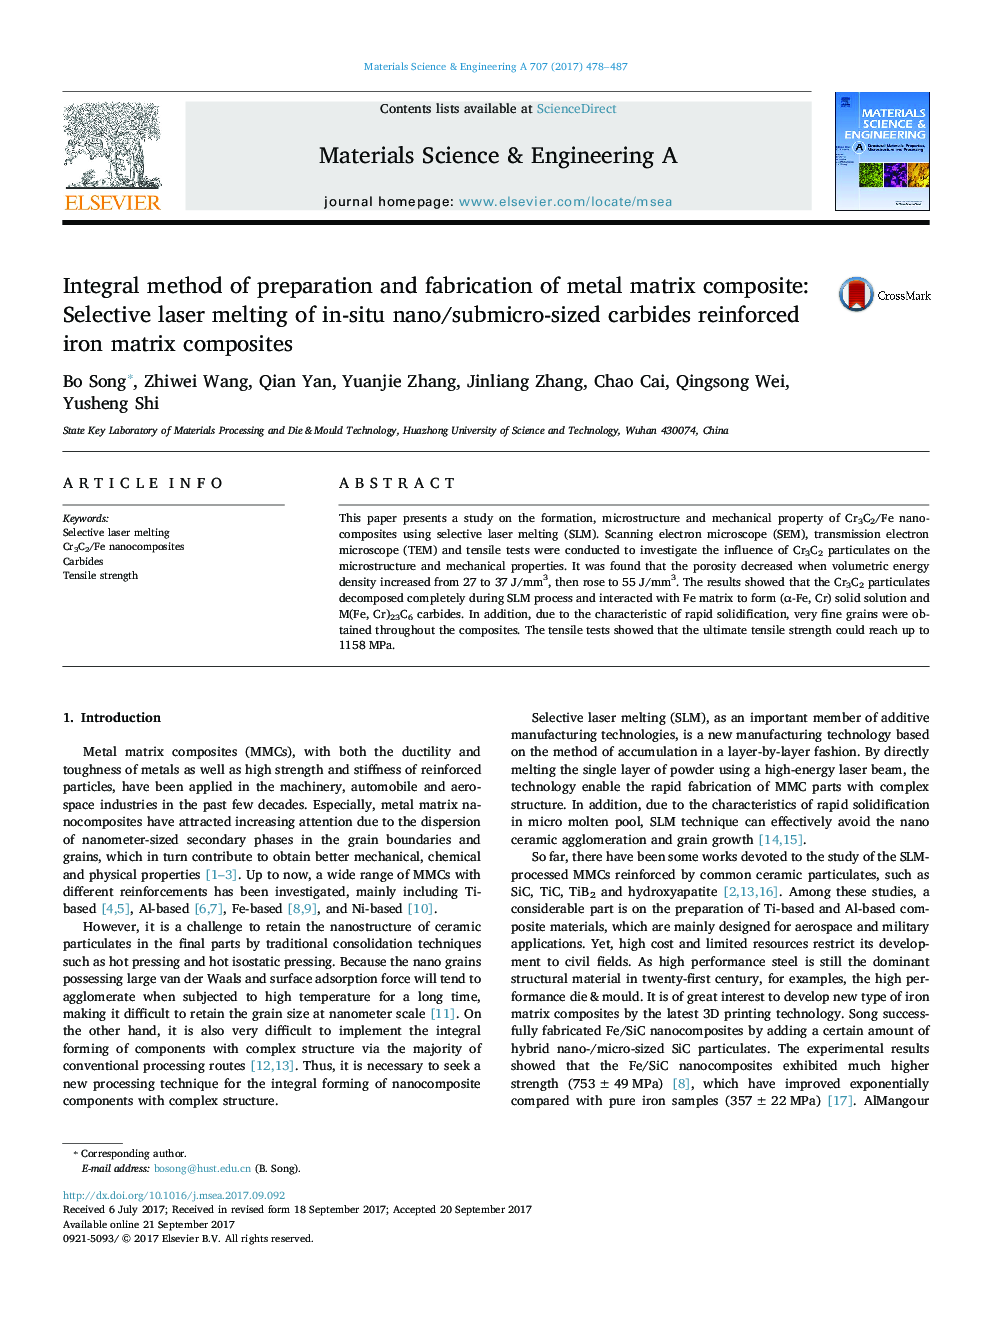 Integral method of preparation and fabrication of metal matrix composite: Selective laser melting ofÂ in-situ nano/submicro-sized carbides reinforced iron matrix composites